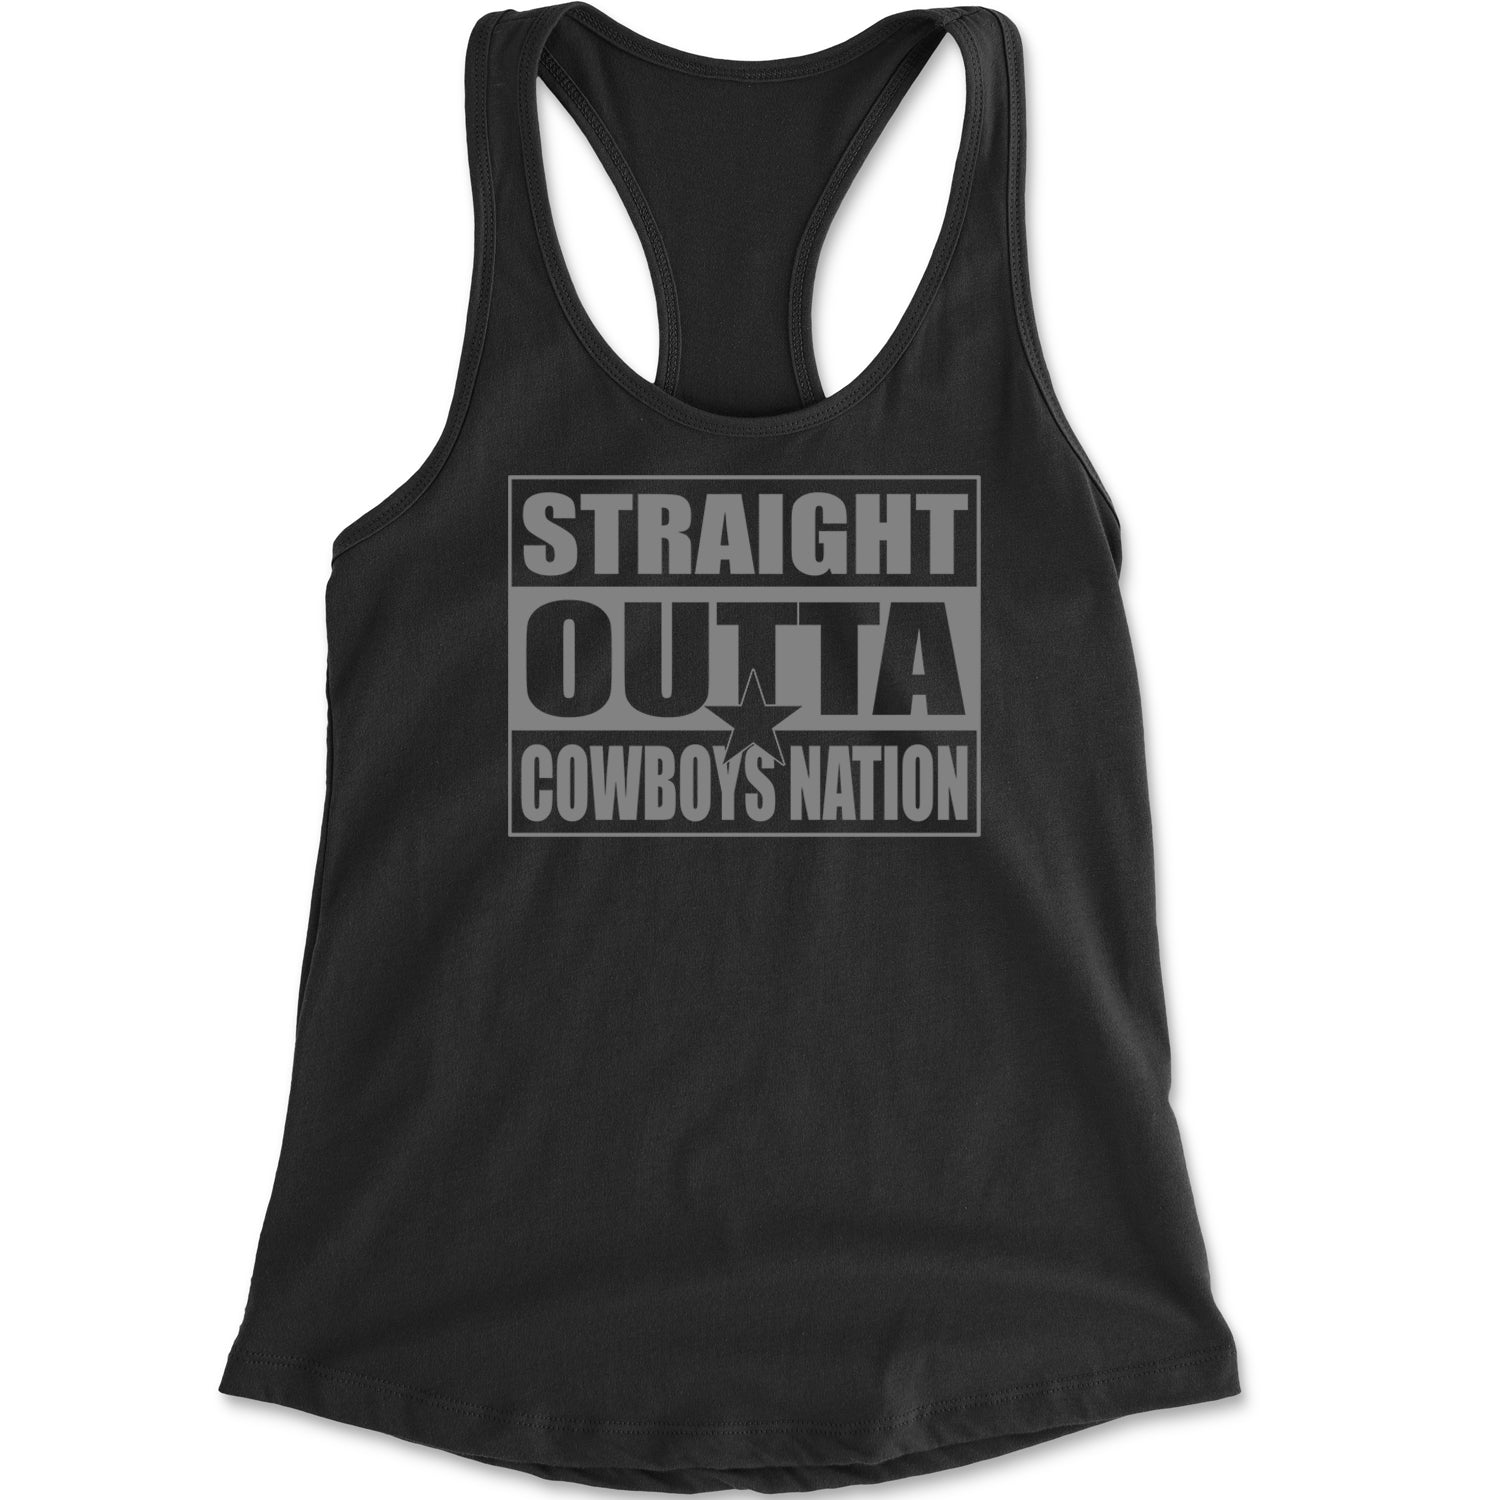 Straight Outta Cowboys Nation   Racerback Tank Top for Women